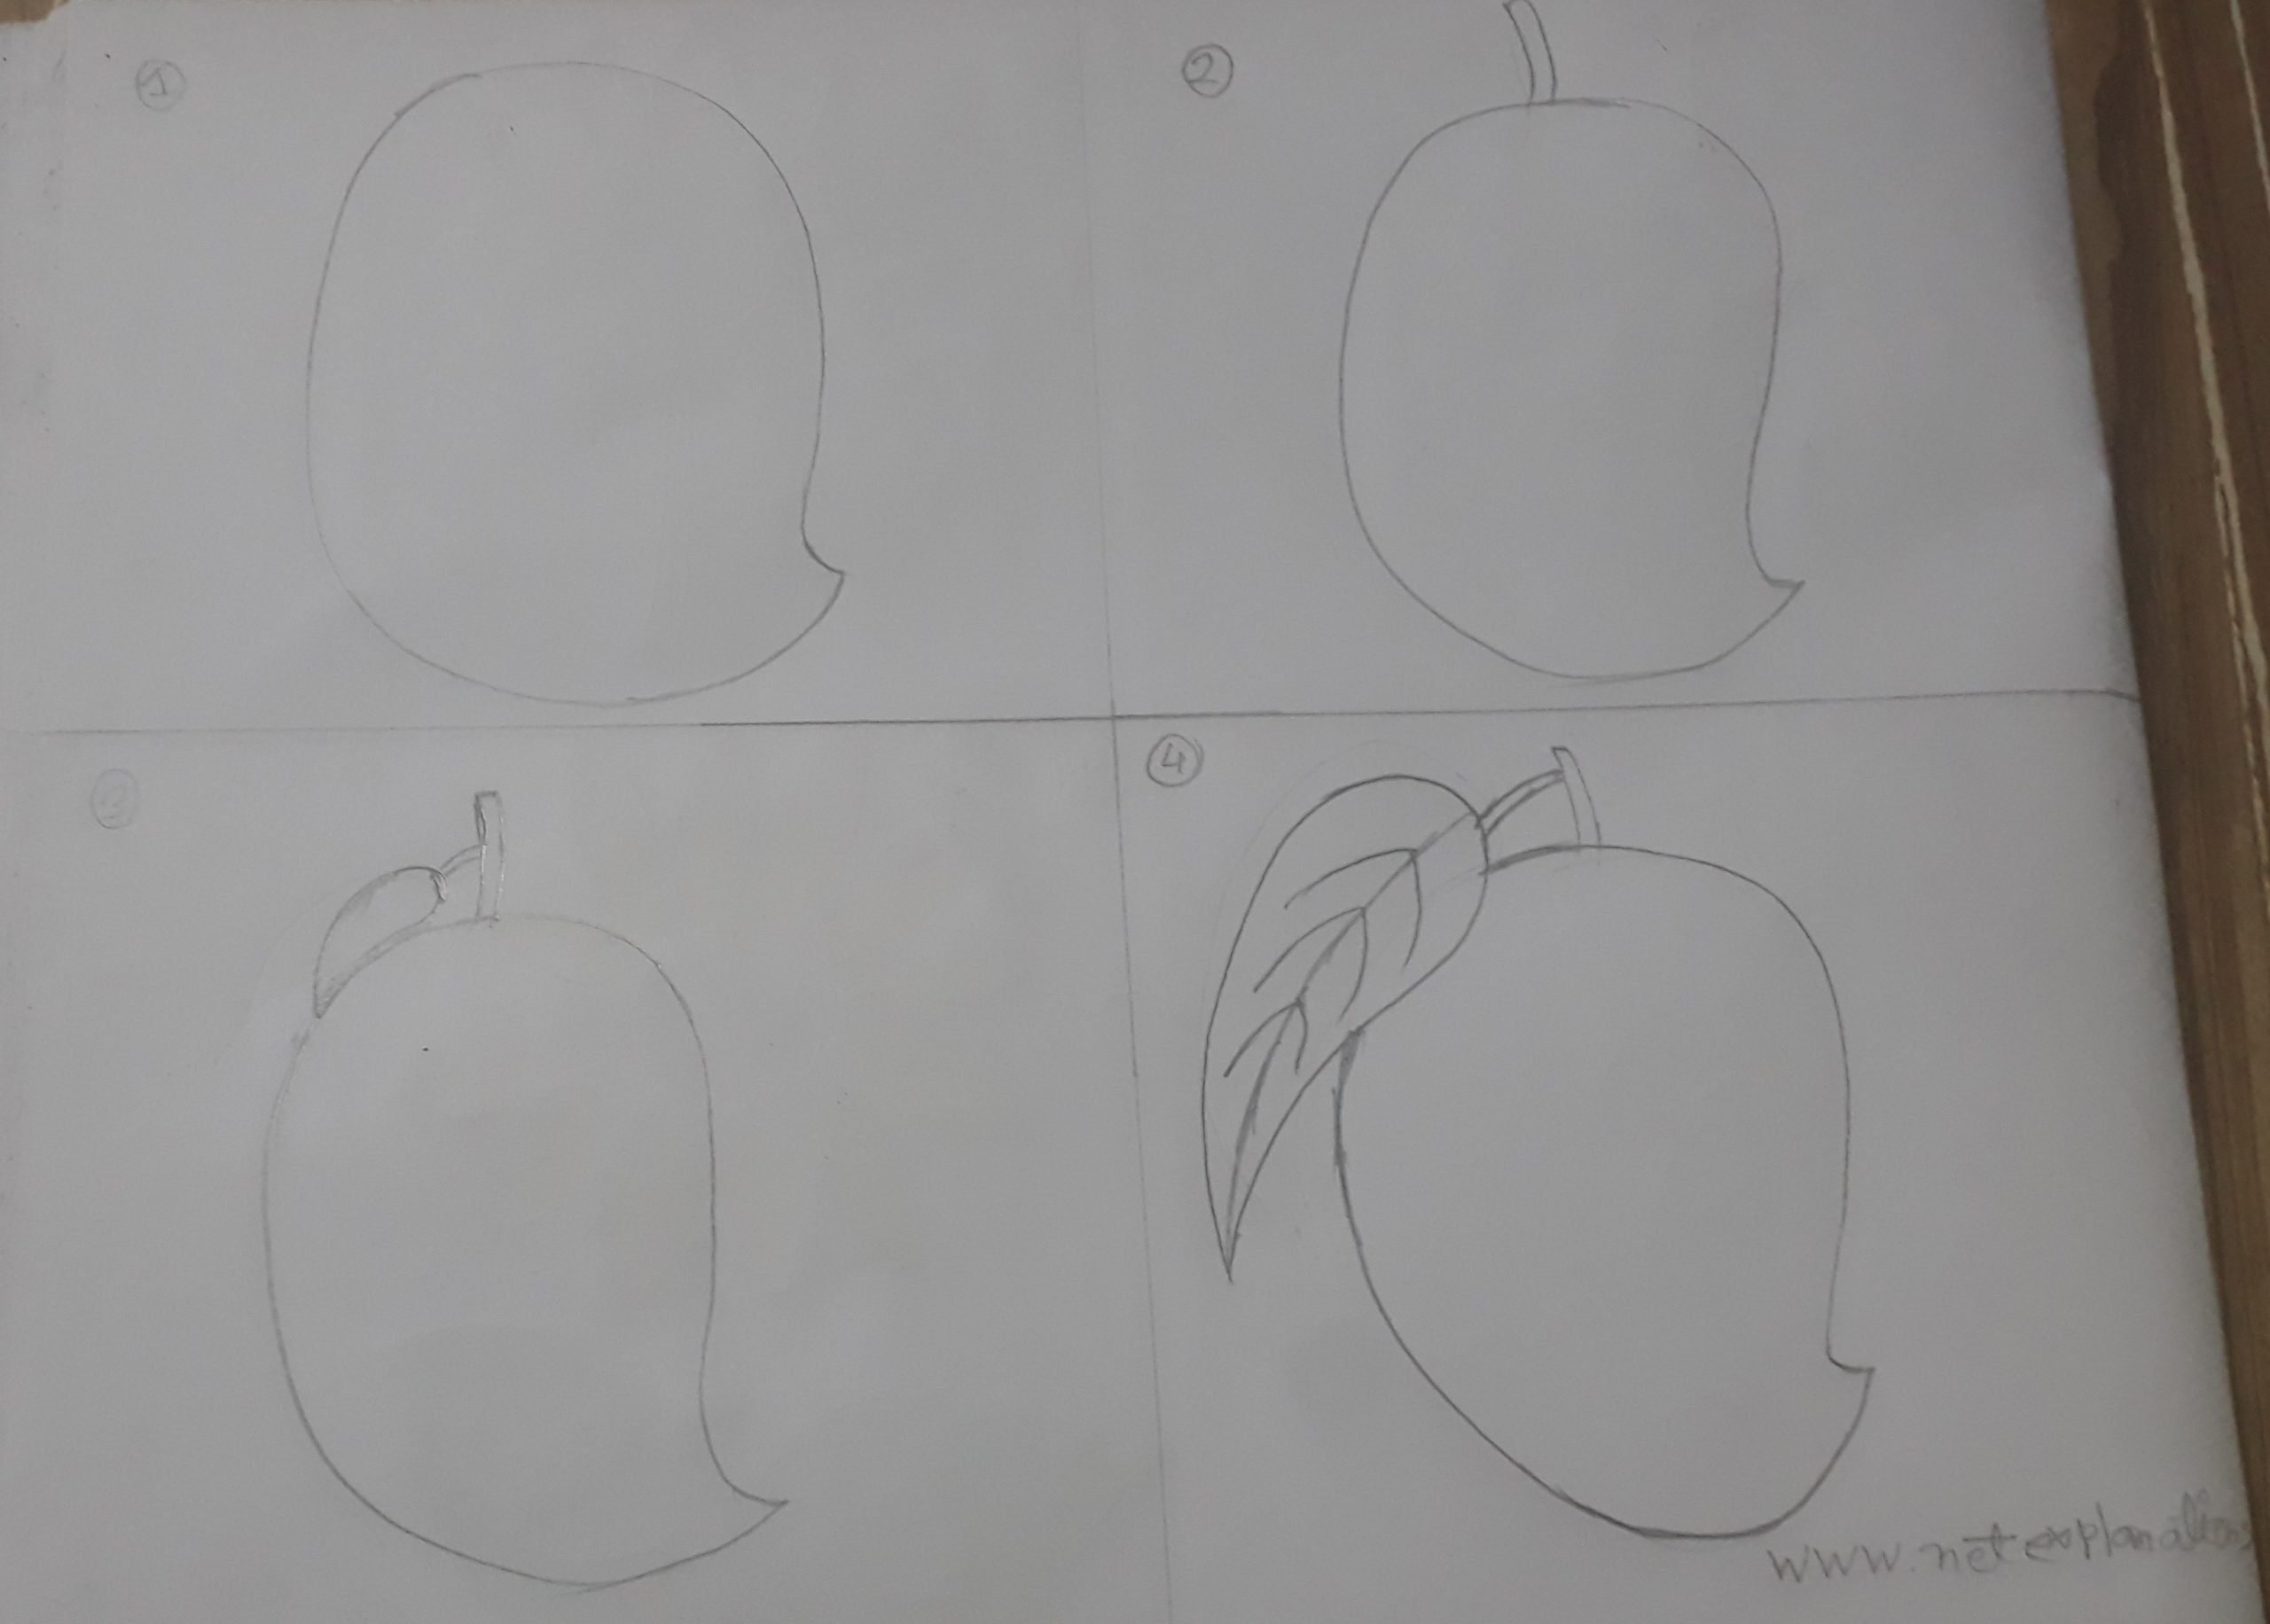 How To Draw Mango In 3 Easy Steps!